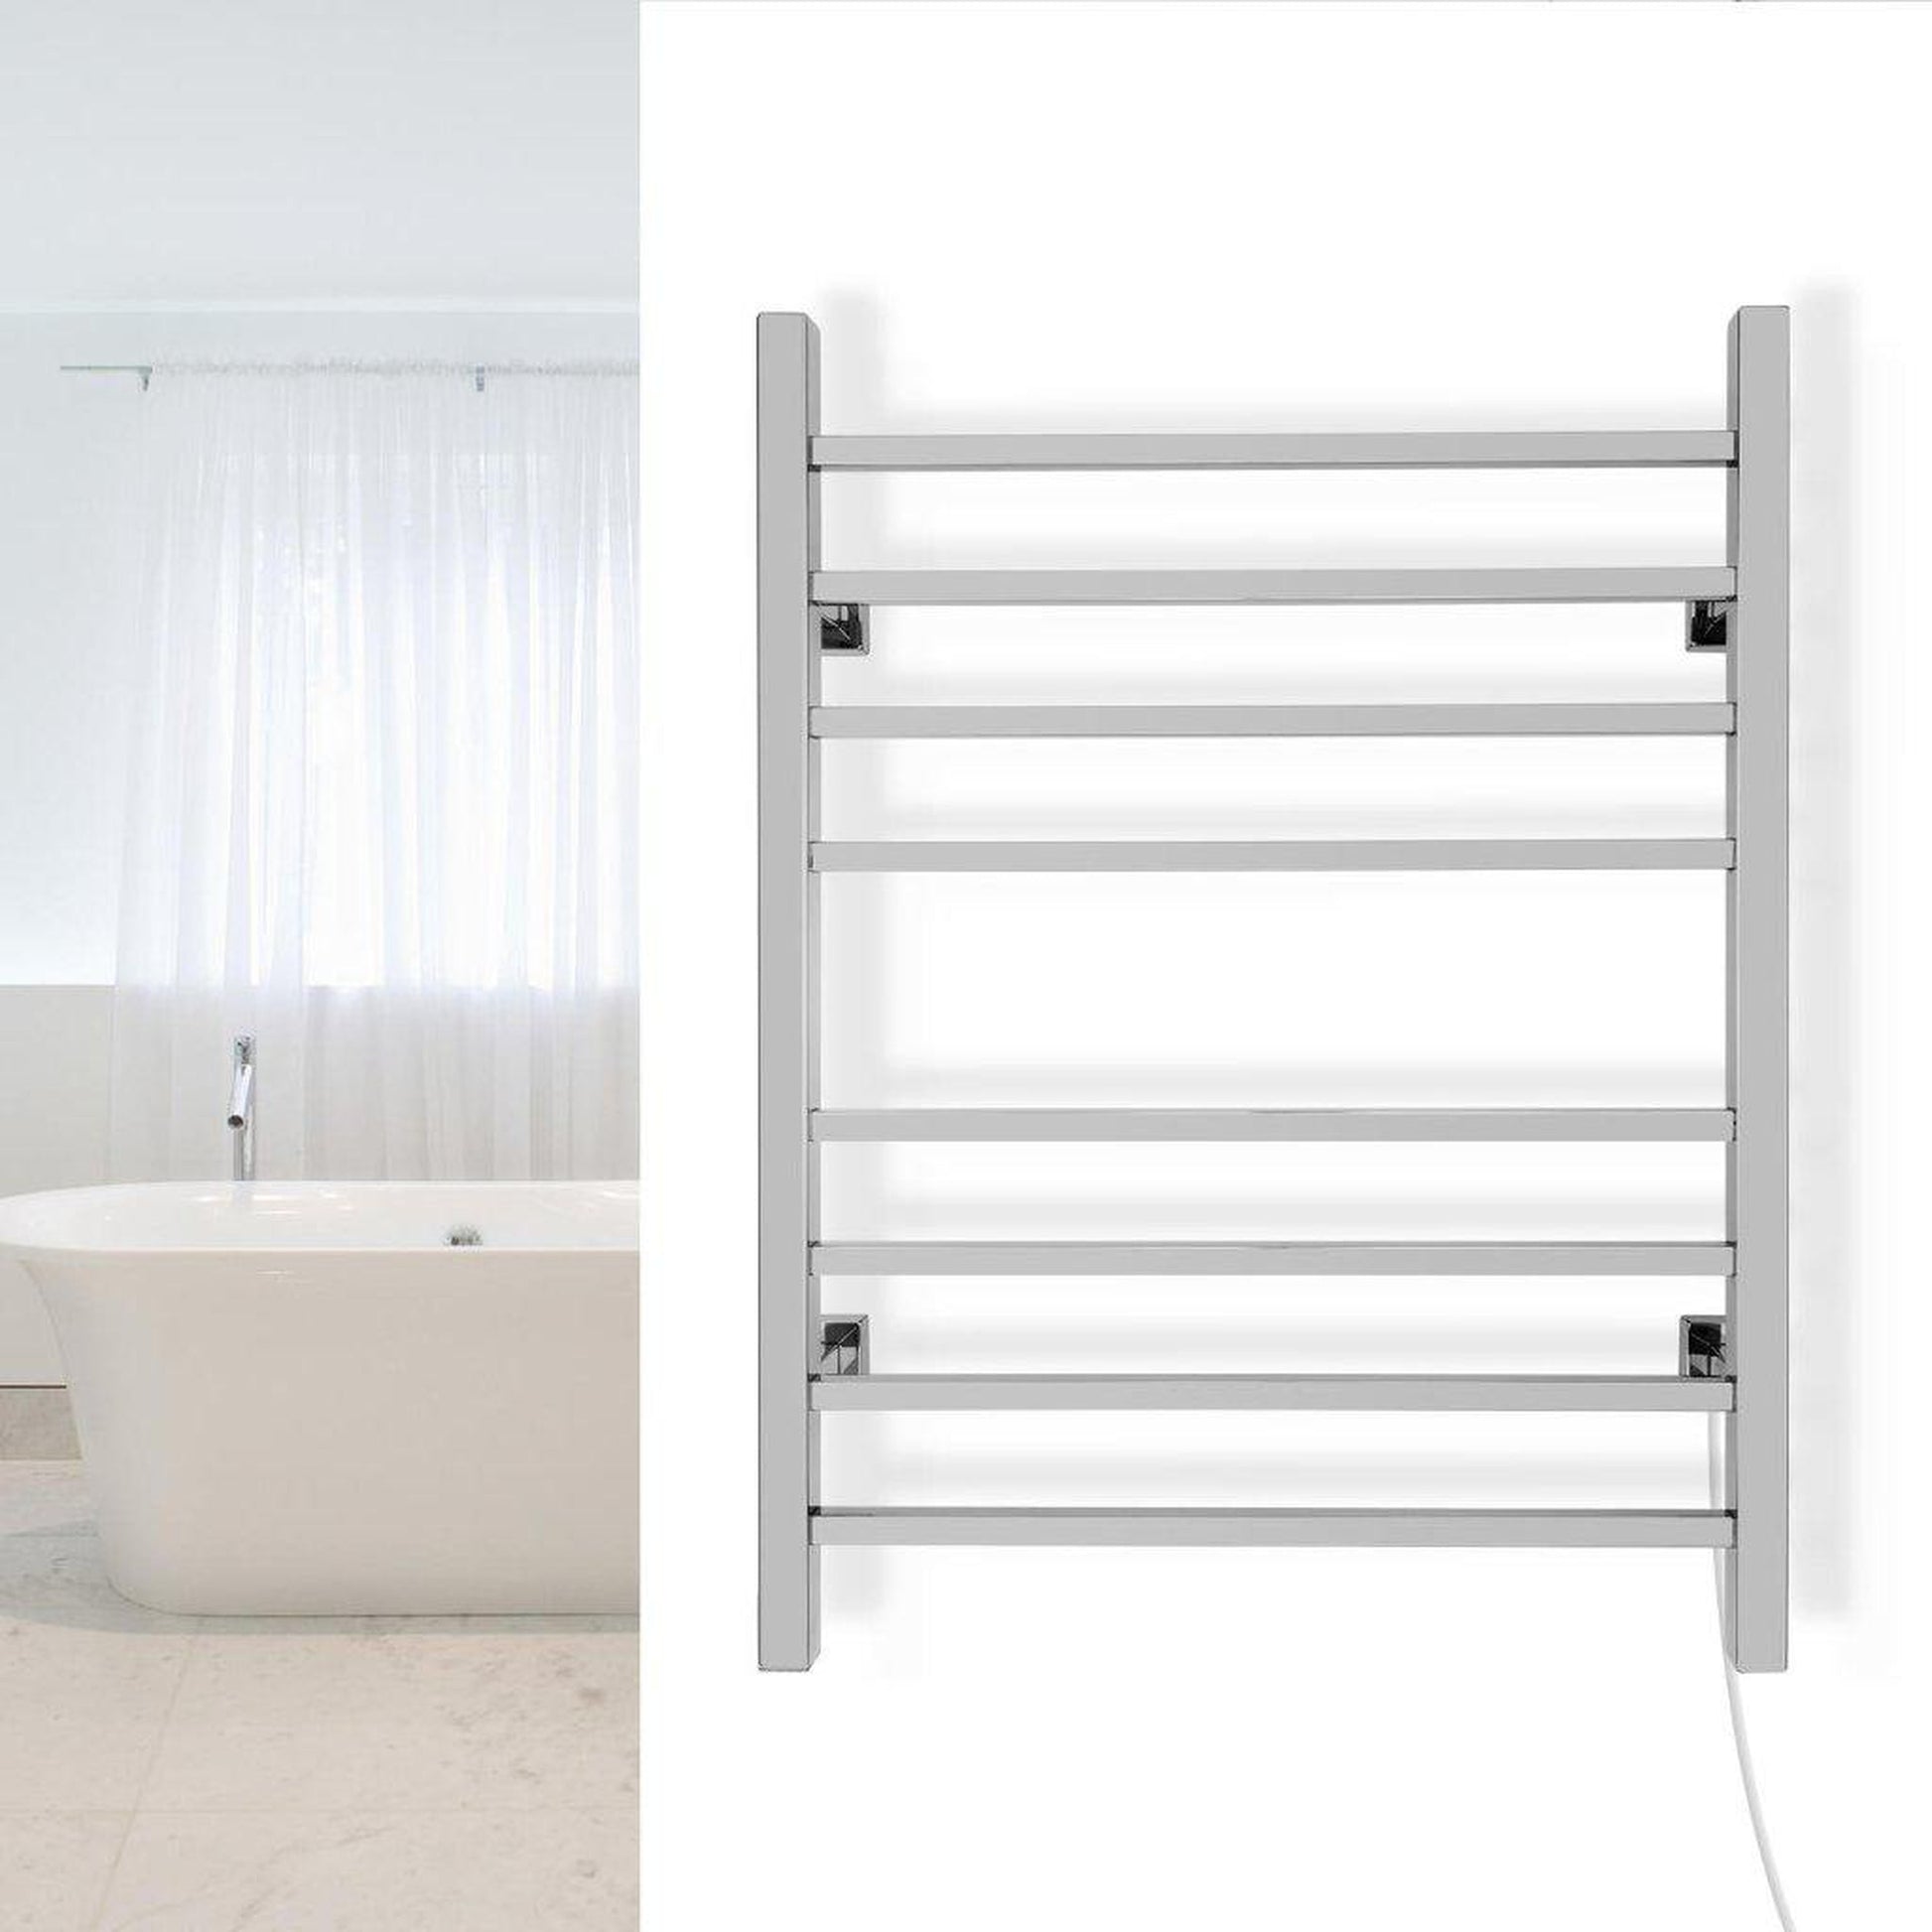  Towel Warmer, Electric Heated Towel Rack with Timer, 10 Square  Bars Wall Mounted 304 Stainless Steel Waterproof Electric Drying Rack  Polishing (Hardwired) : Home & Kitchen